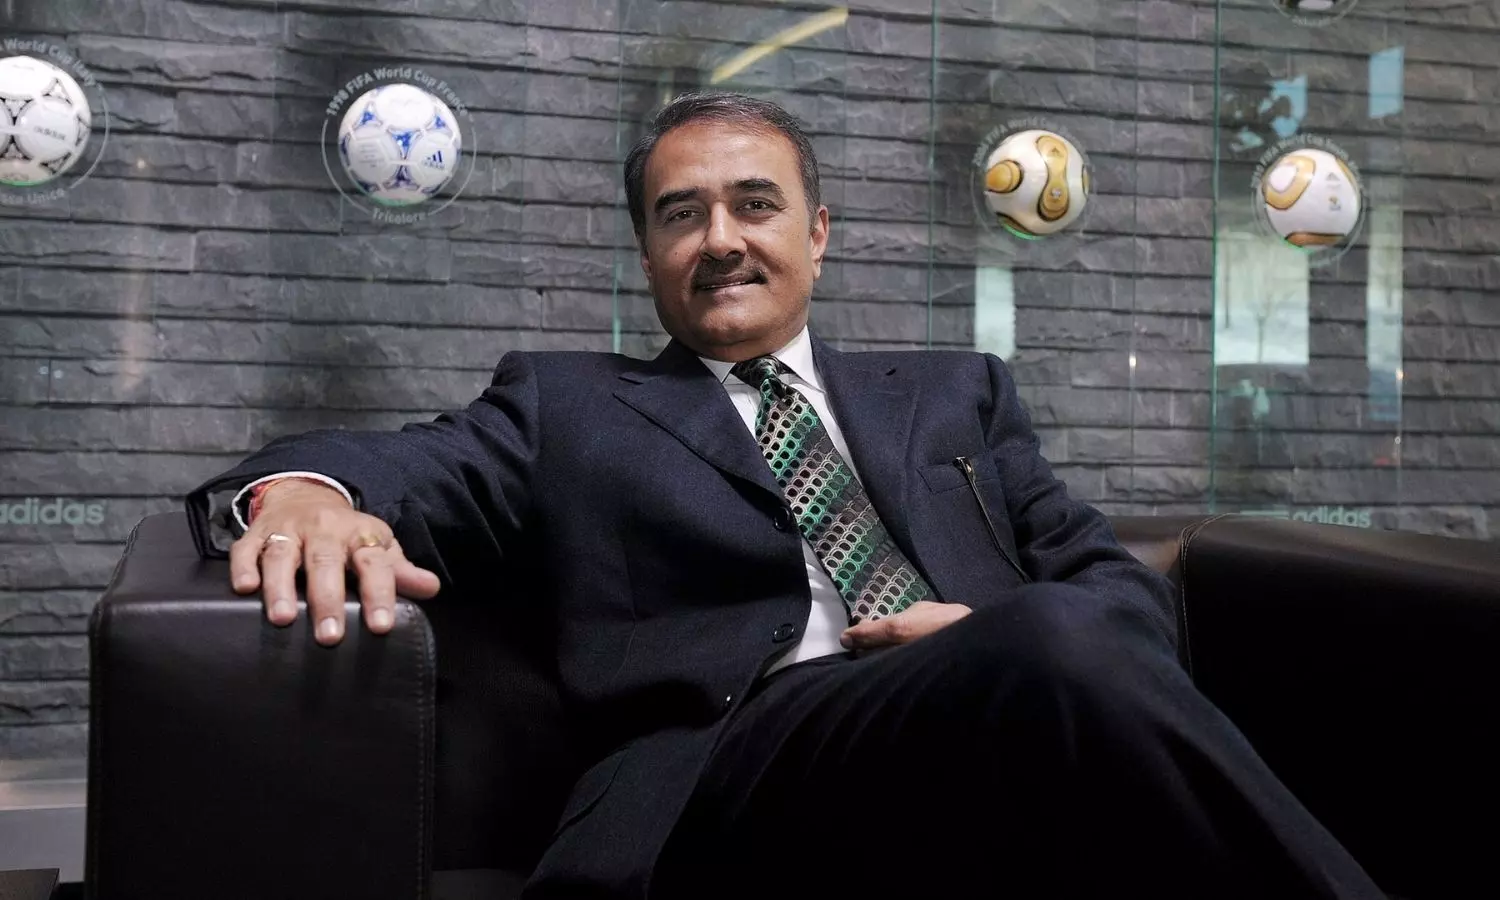 AIFF President Praful Patel steps down after Supreme Court directive